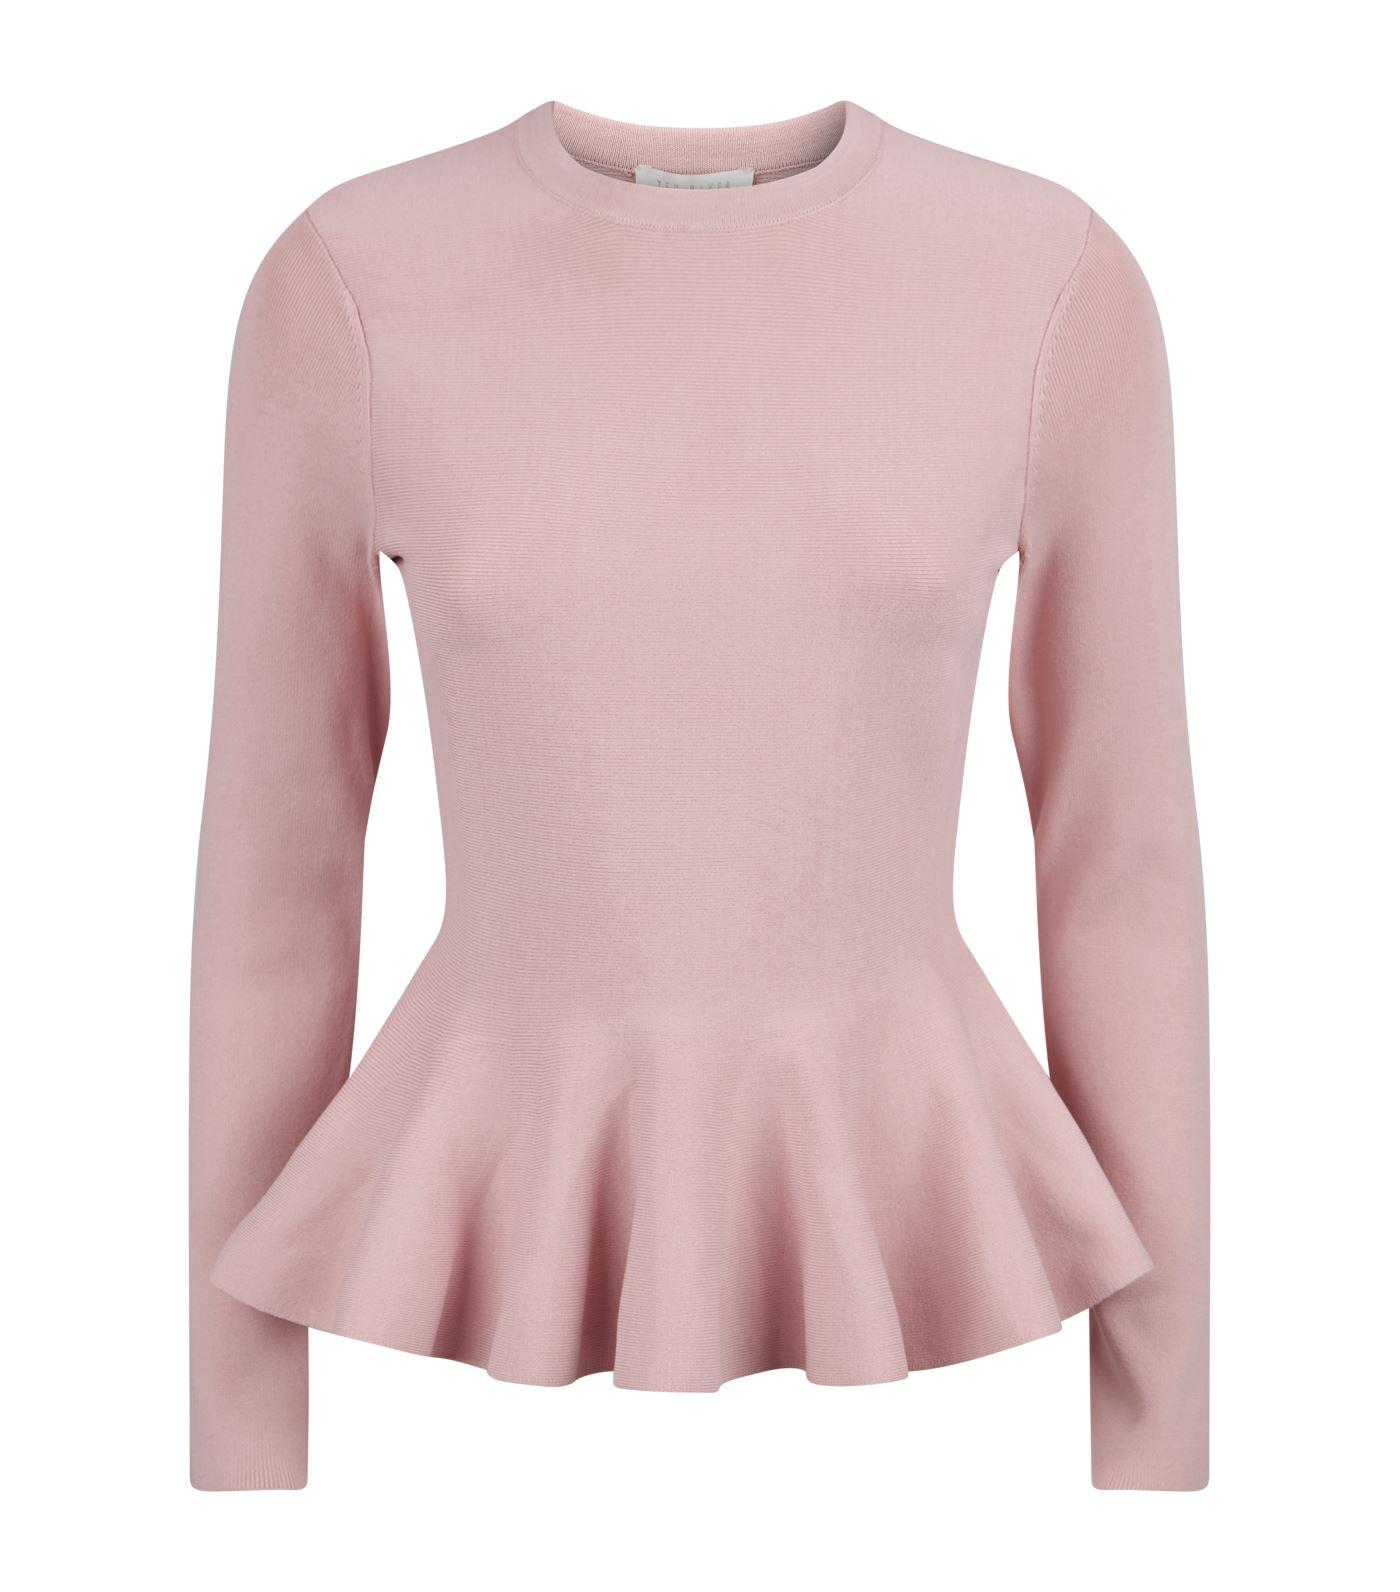 Ted Baker Hinlina Peplum Sweater in Pink - Lyst